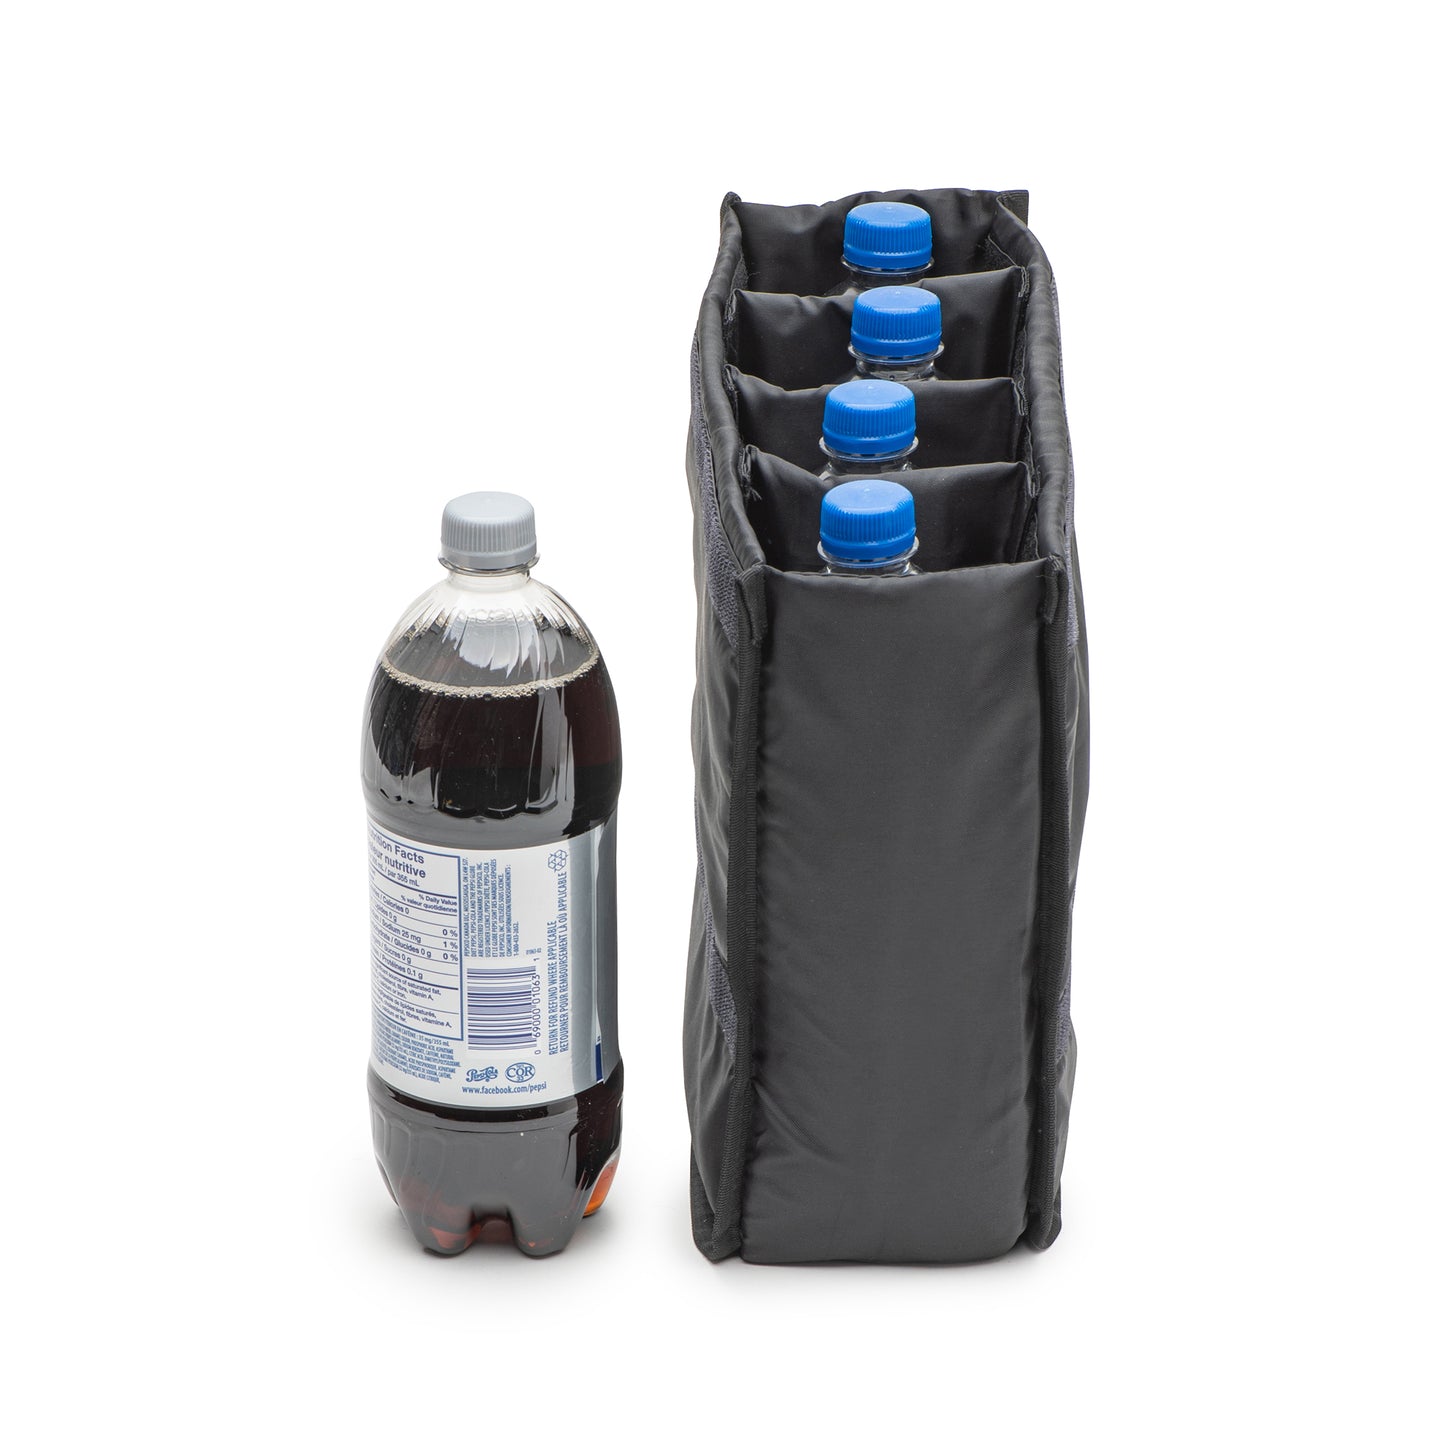 XX-Large Insulated Drink Carrier for Larger Drinks-14x14x12 In. Hold Up To 12 Drinks